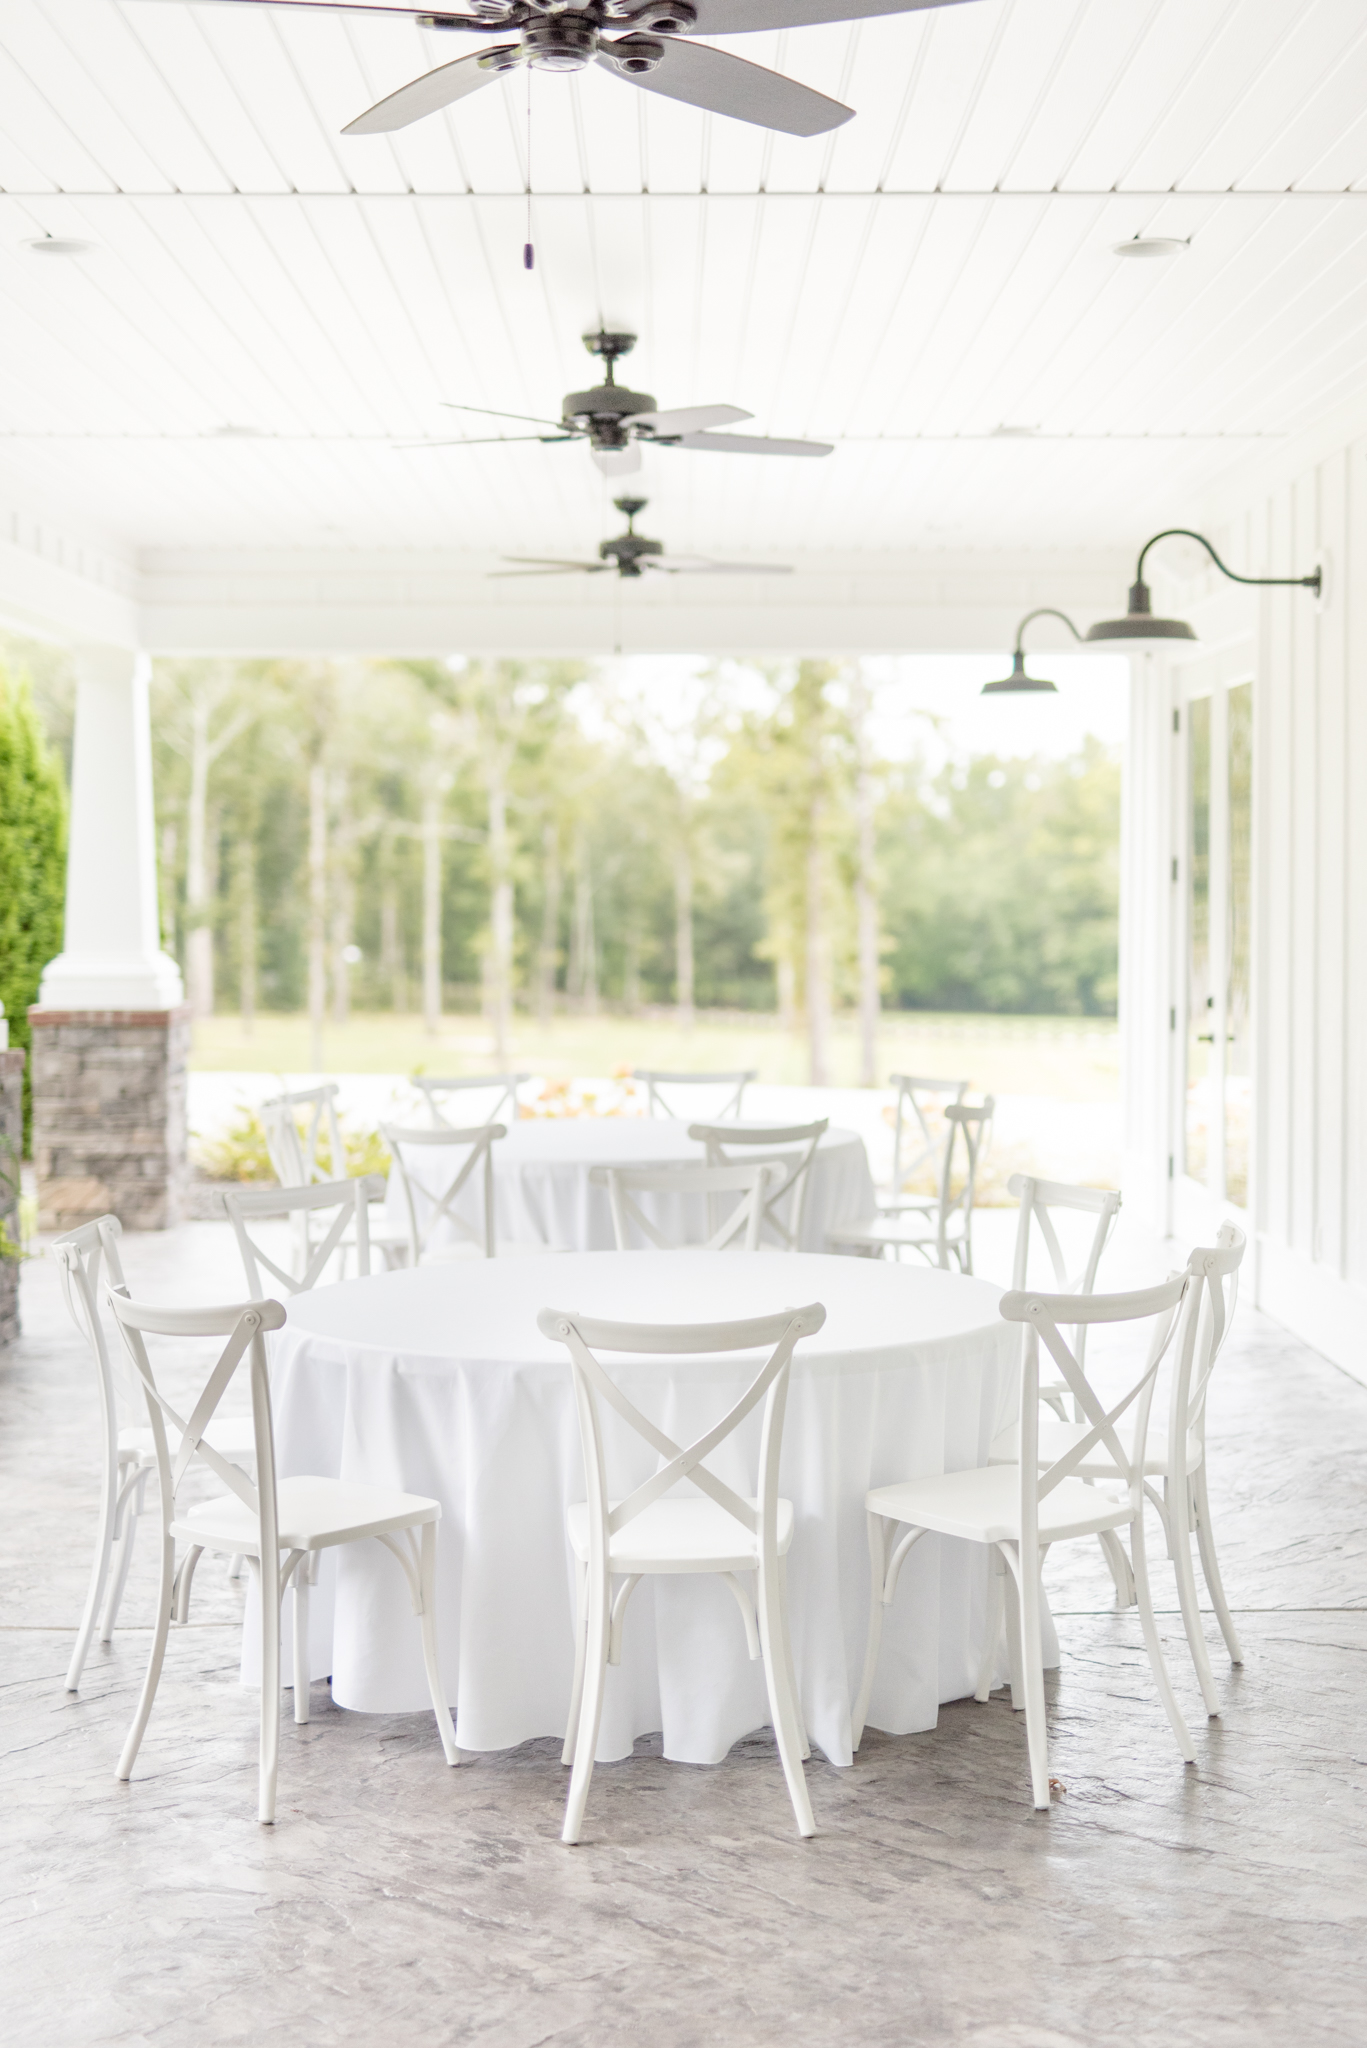 White table and chairs under awning for reception.